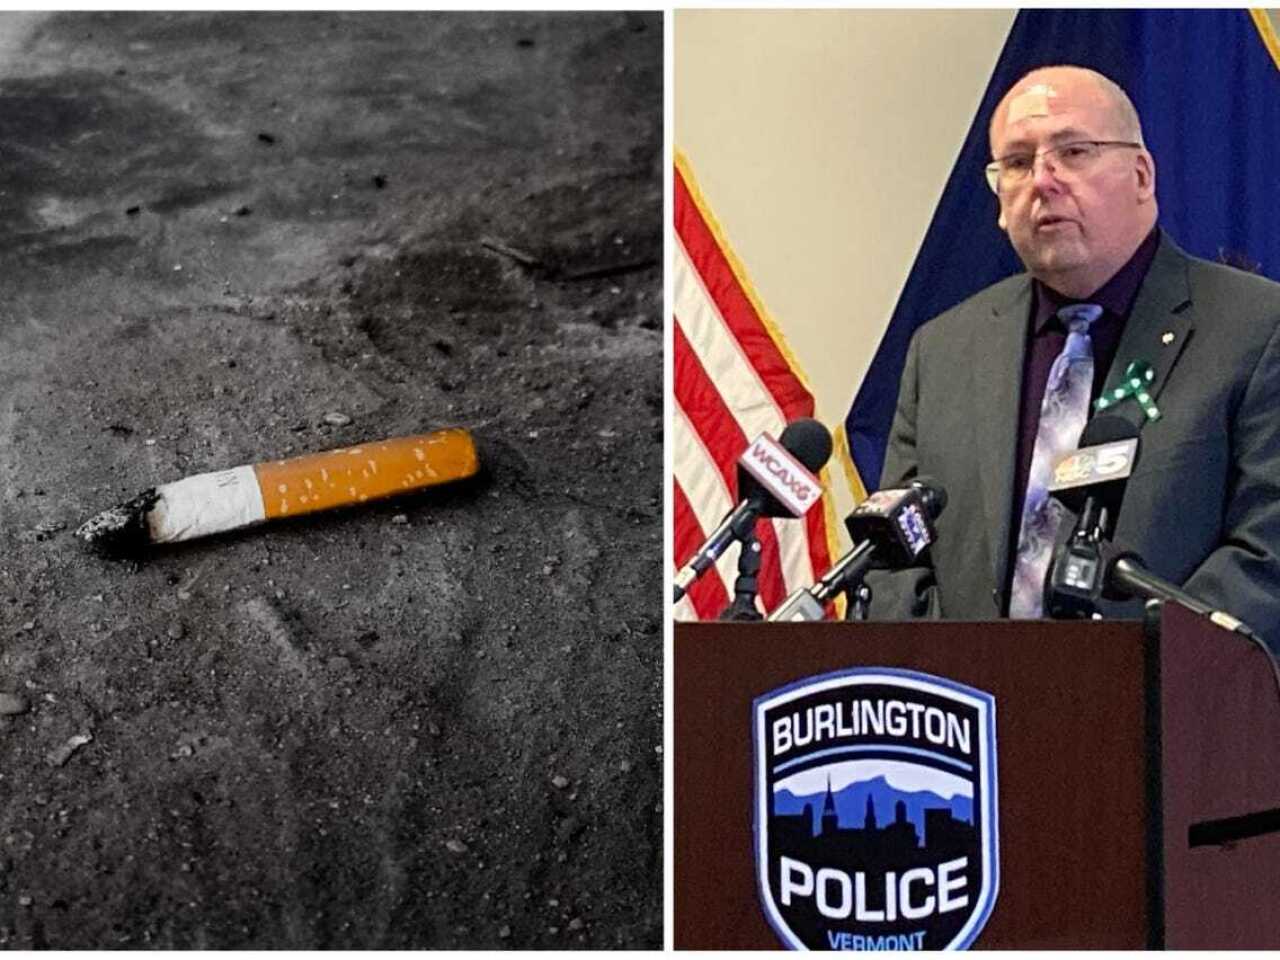 [IMAGE] Discarded cigarette butt helped police solve 52-year-old murder case